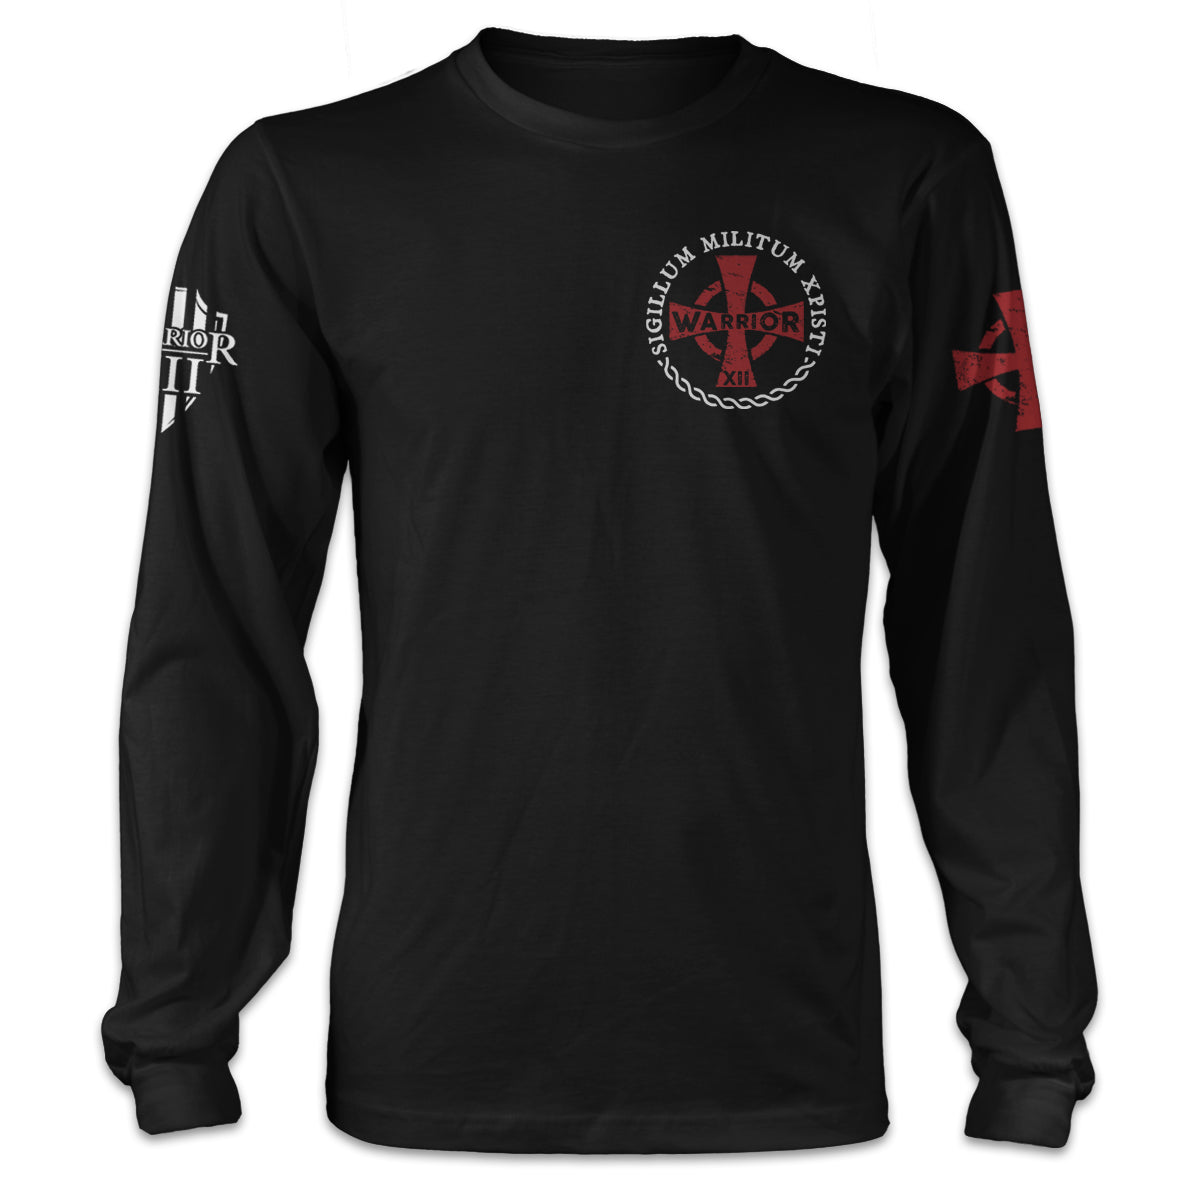 A black long sleeve shirt with a red crusader cross printed on the front.